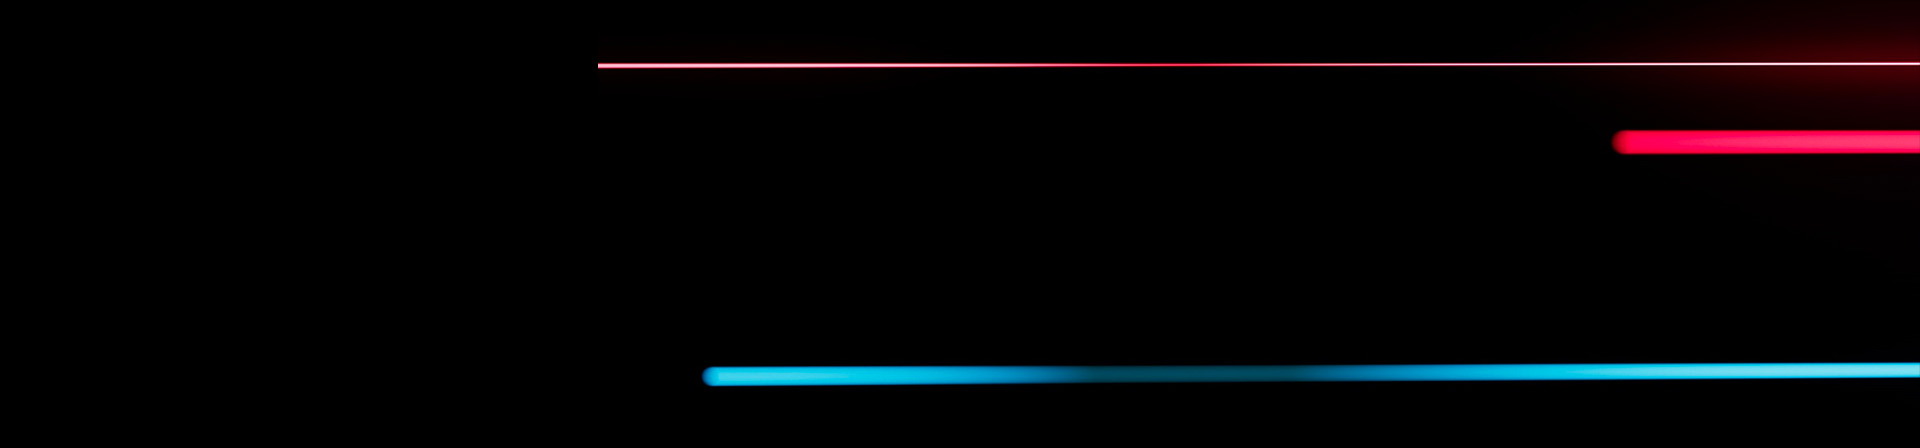 Large red and blue lightspeed racing graphic, pulsing slowly